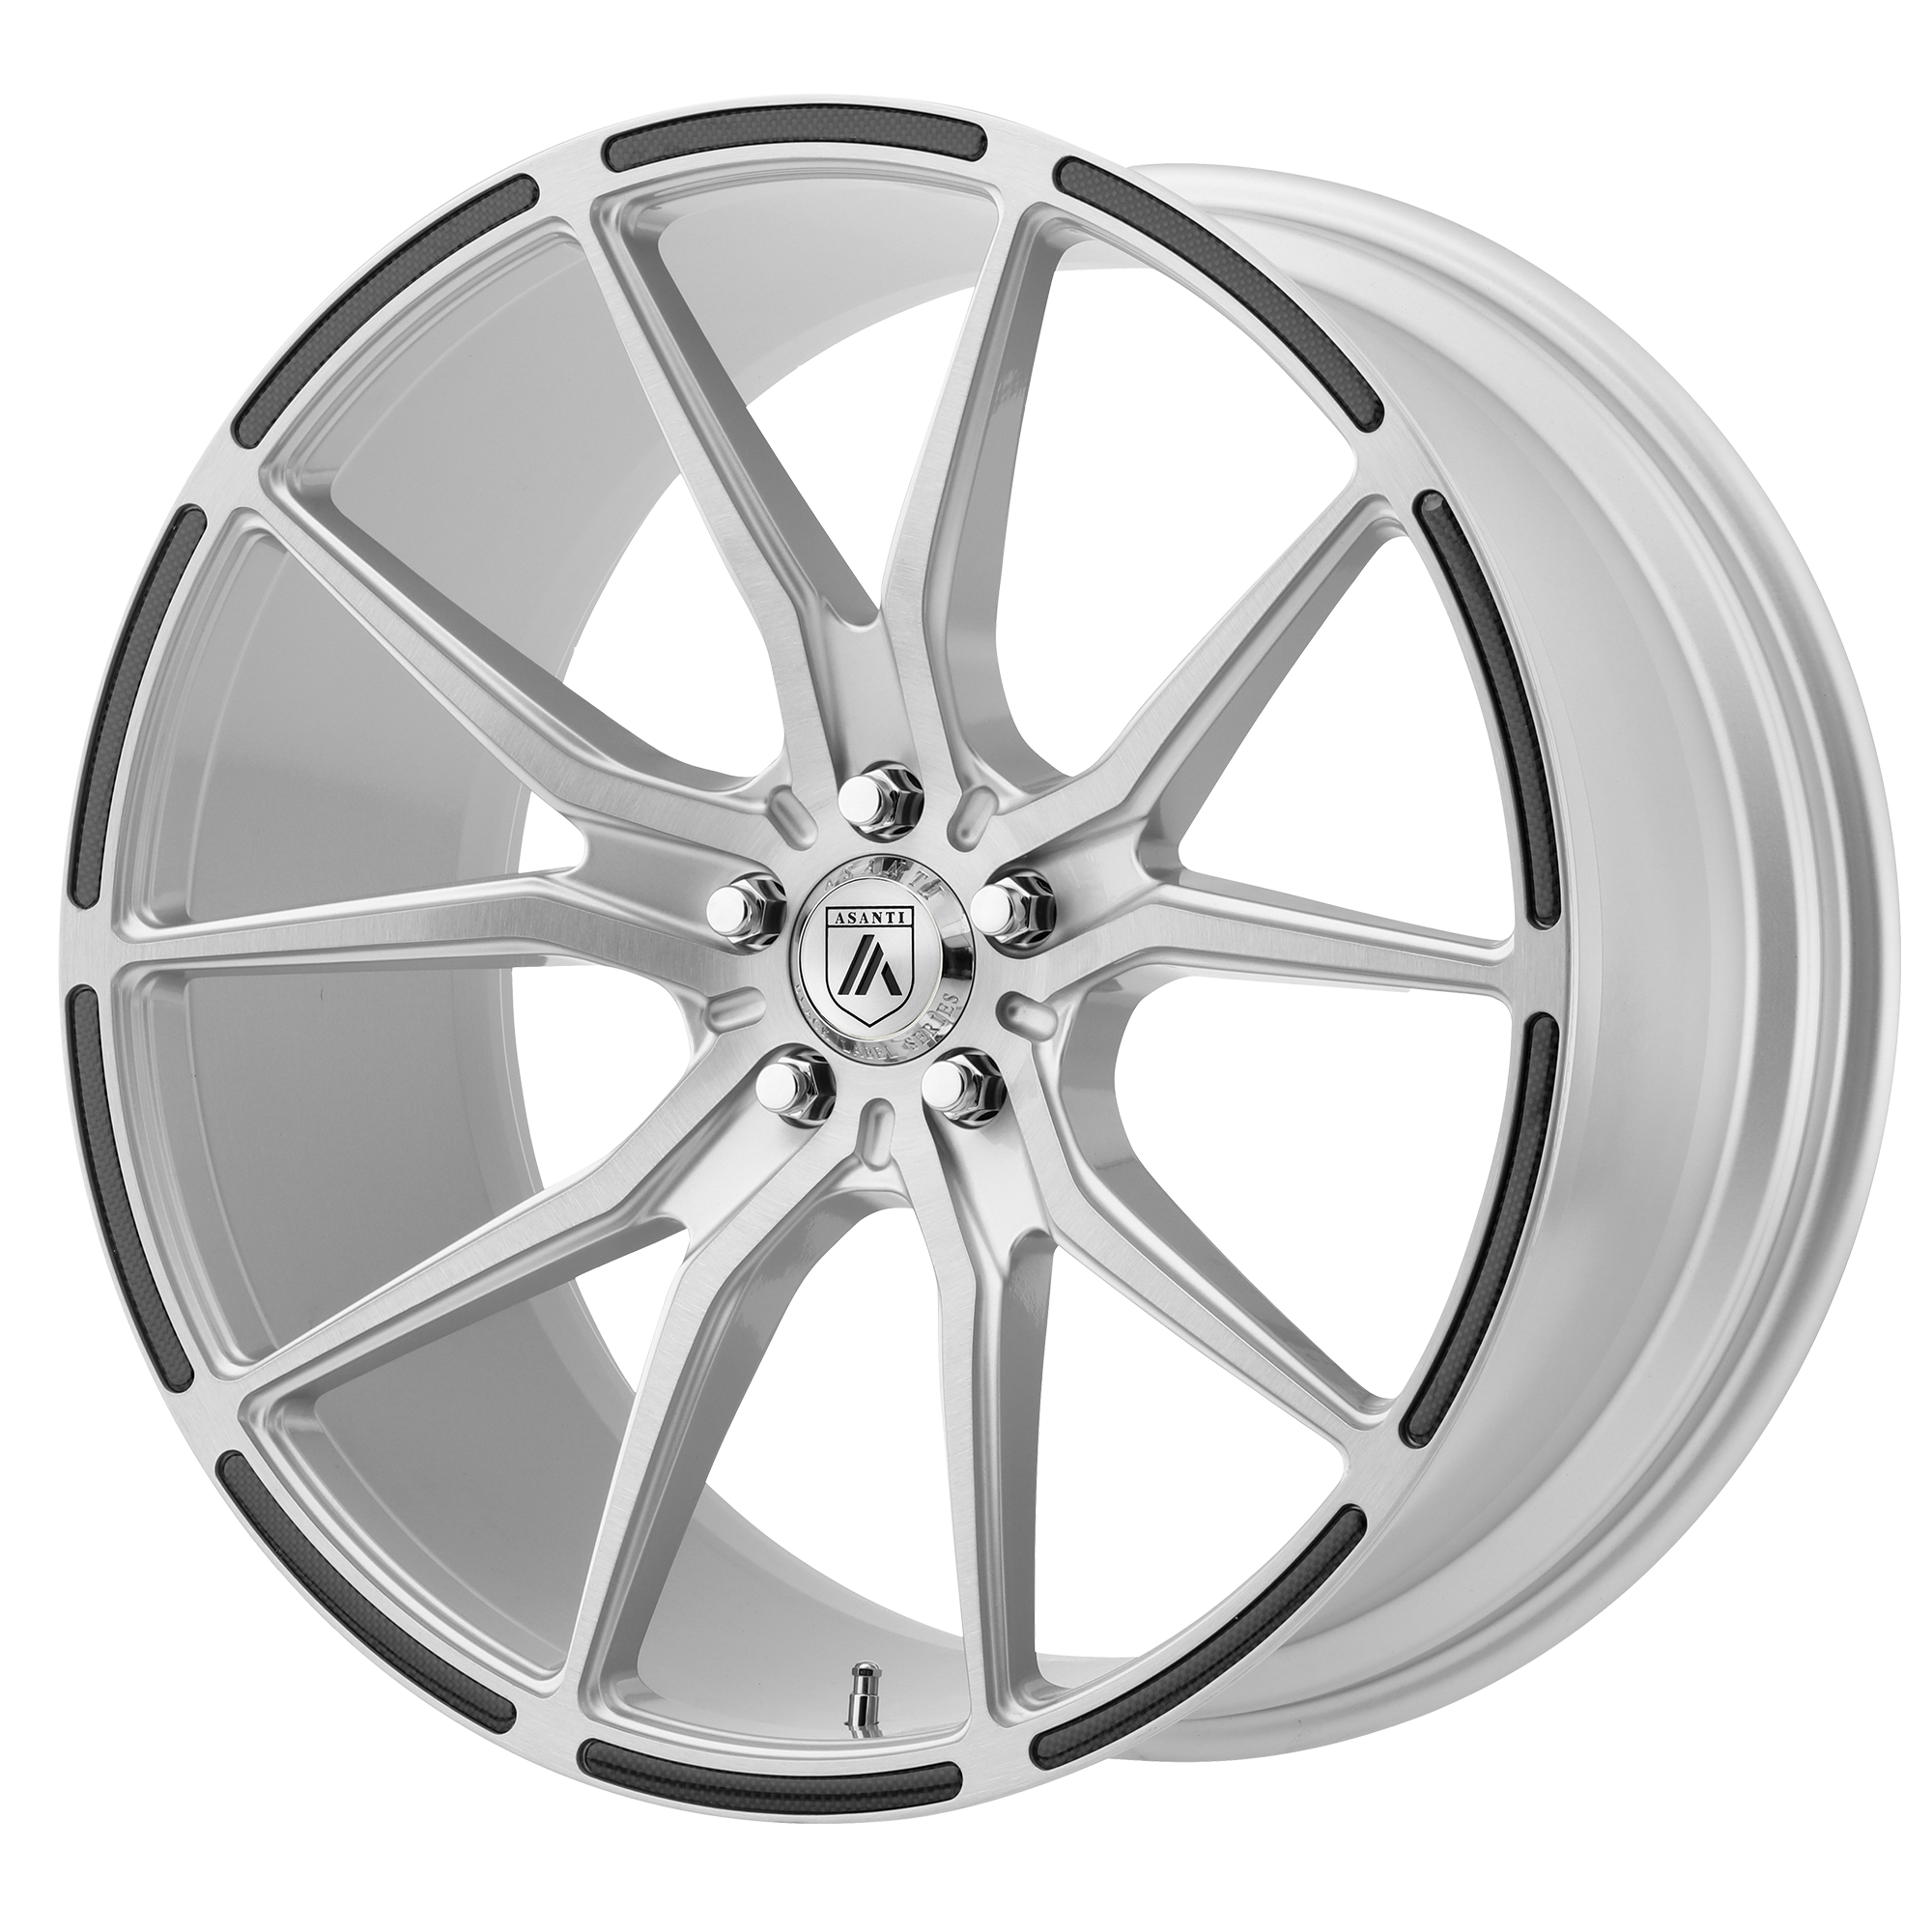 VEGA 22x10.5 Blank BRUSHED SILVER W/ CARBON FIBER INSERTS (35.00 - 45.00 mm) - Tires and Engine Performance